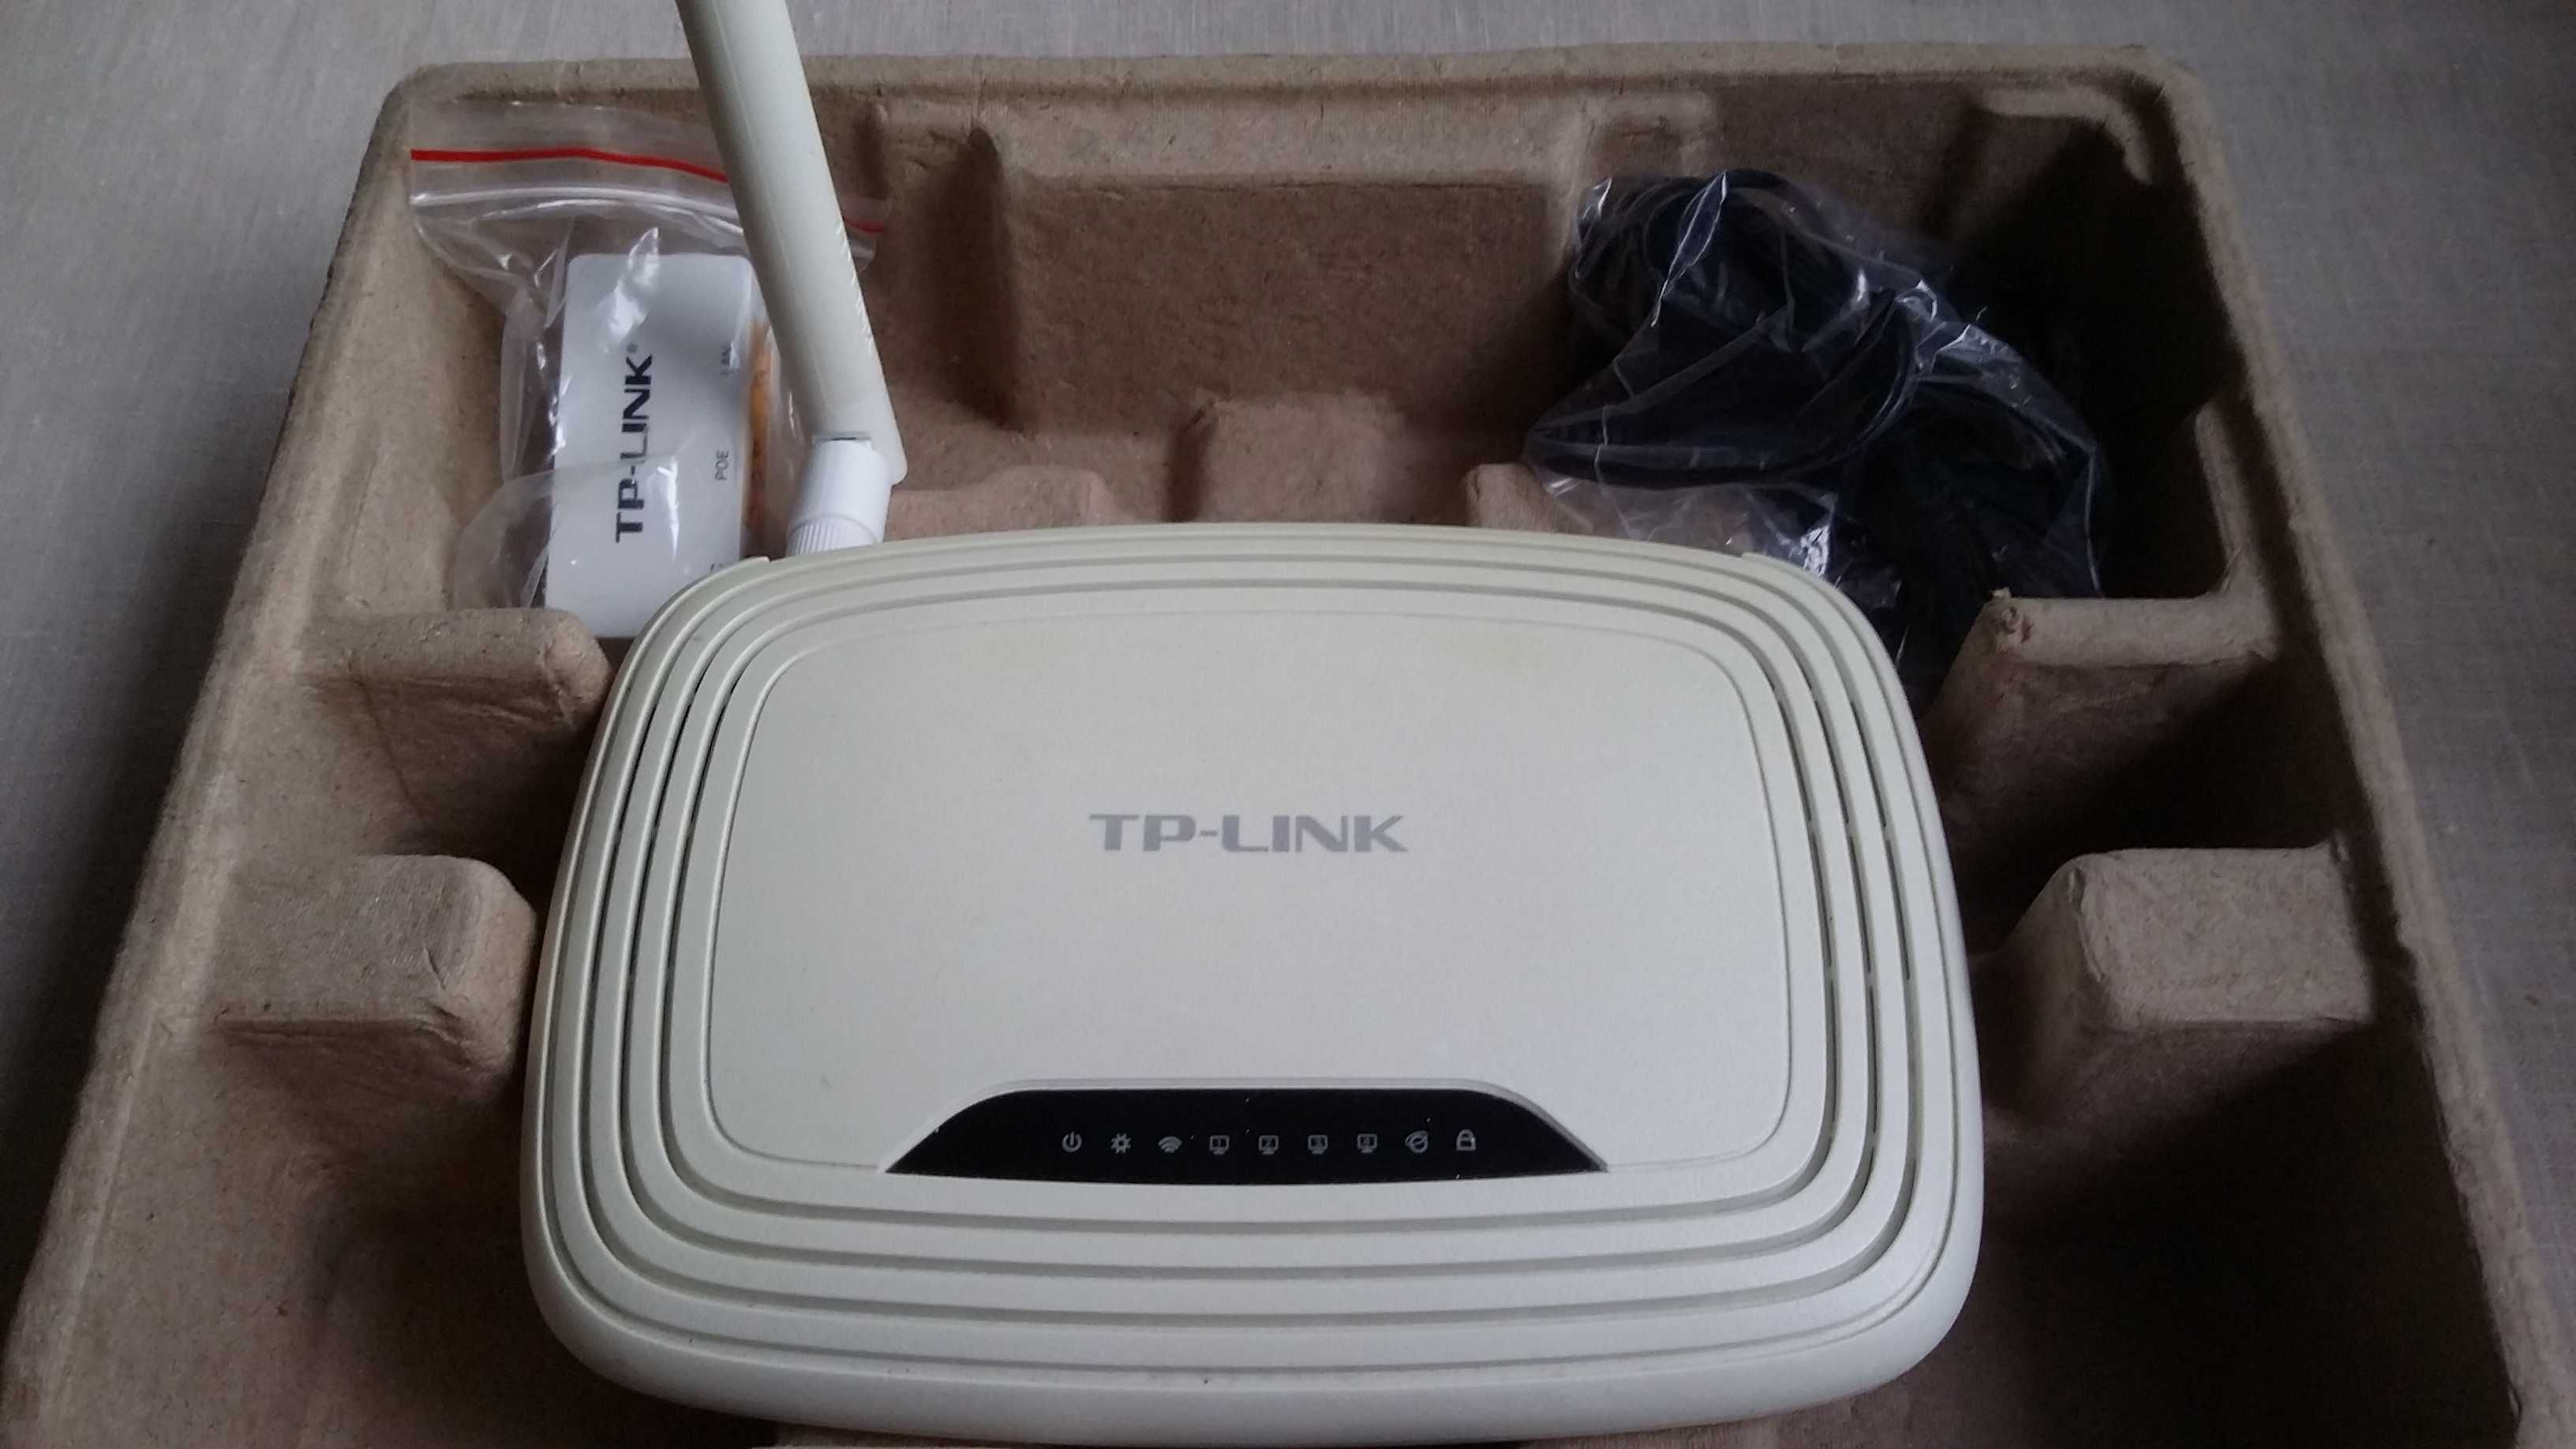 Router WiFi TP-LINK TL-WR743ND ver. 2.3